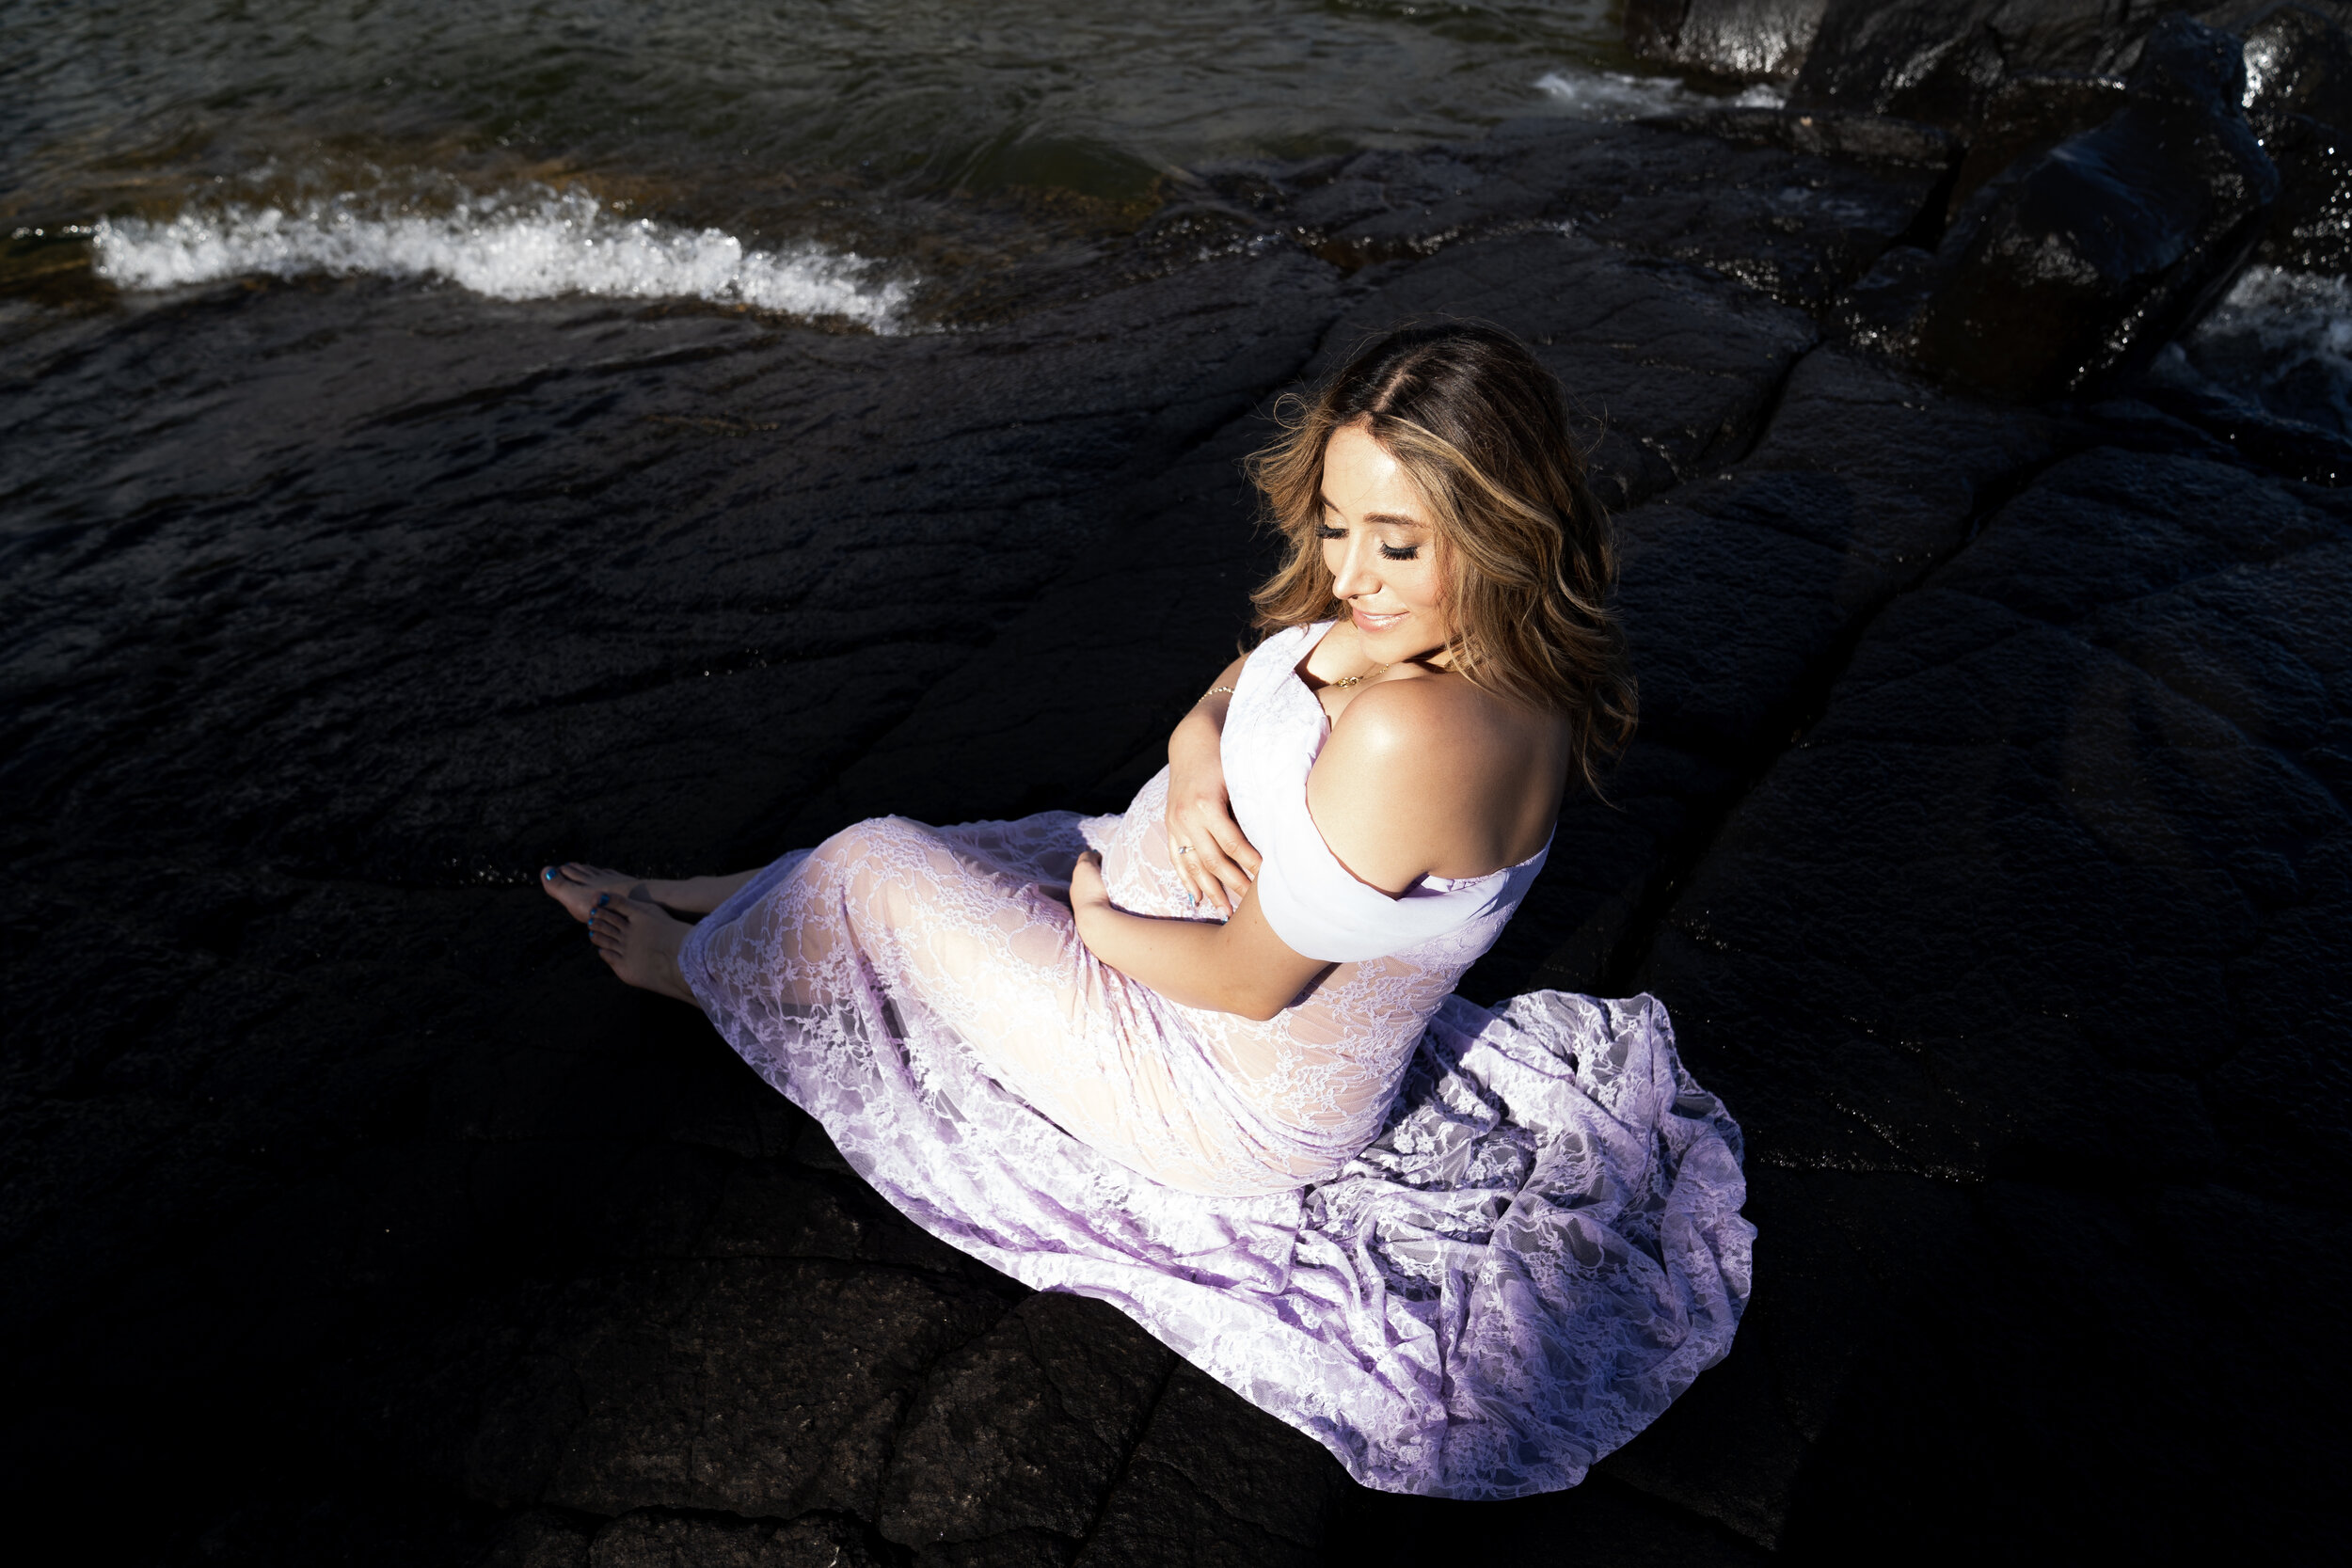 Pregnant woman in a lilac gown holding her belly - image taken from above